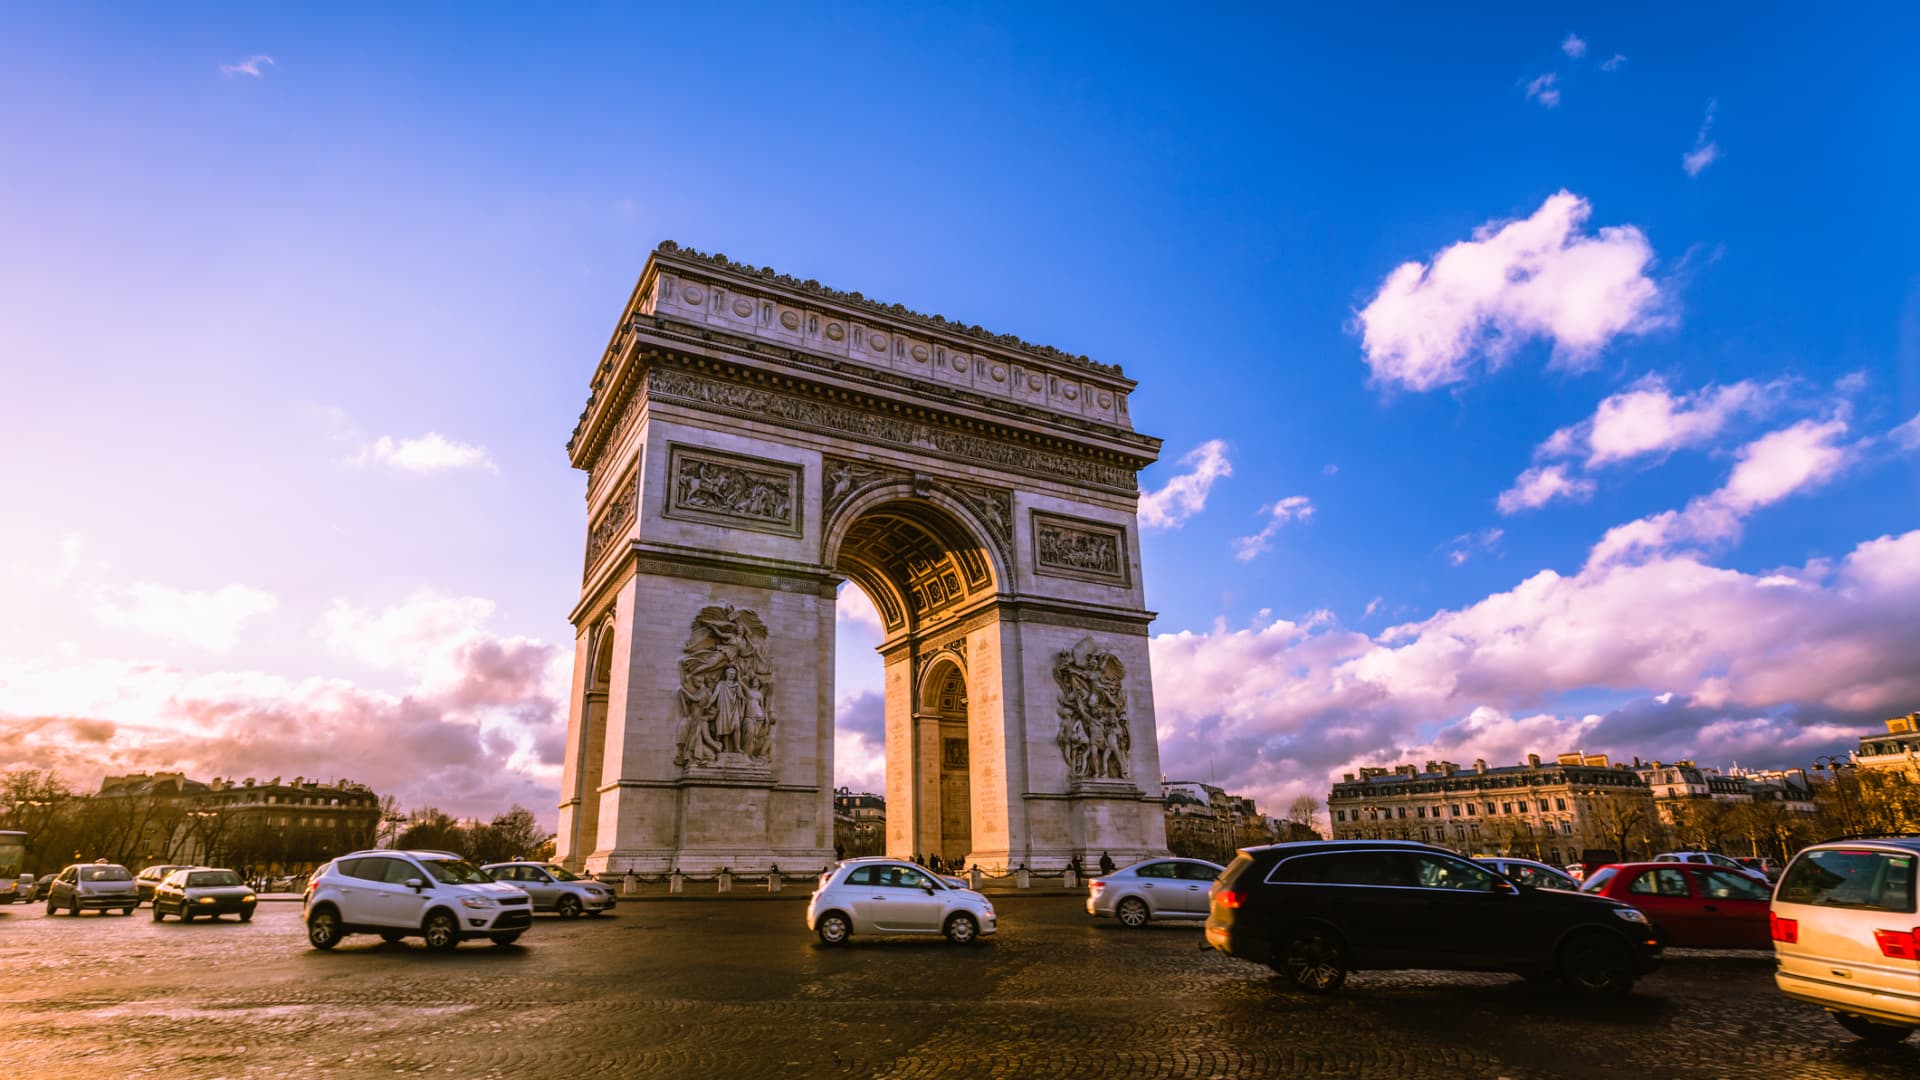 Renault and Ferrovial expand electric car-sharing service to Paris